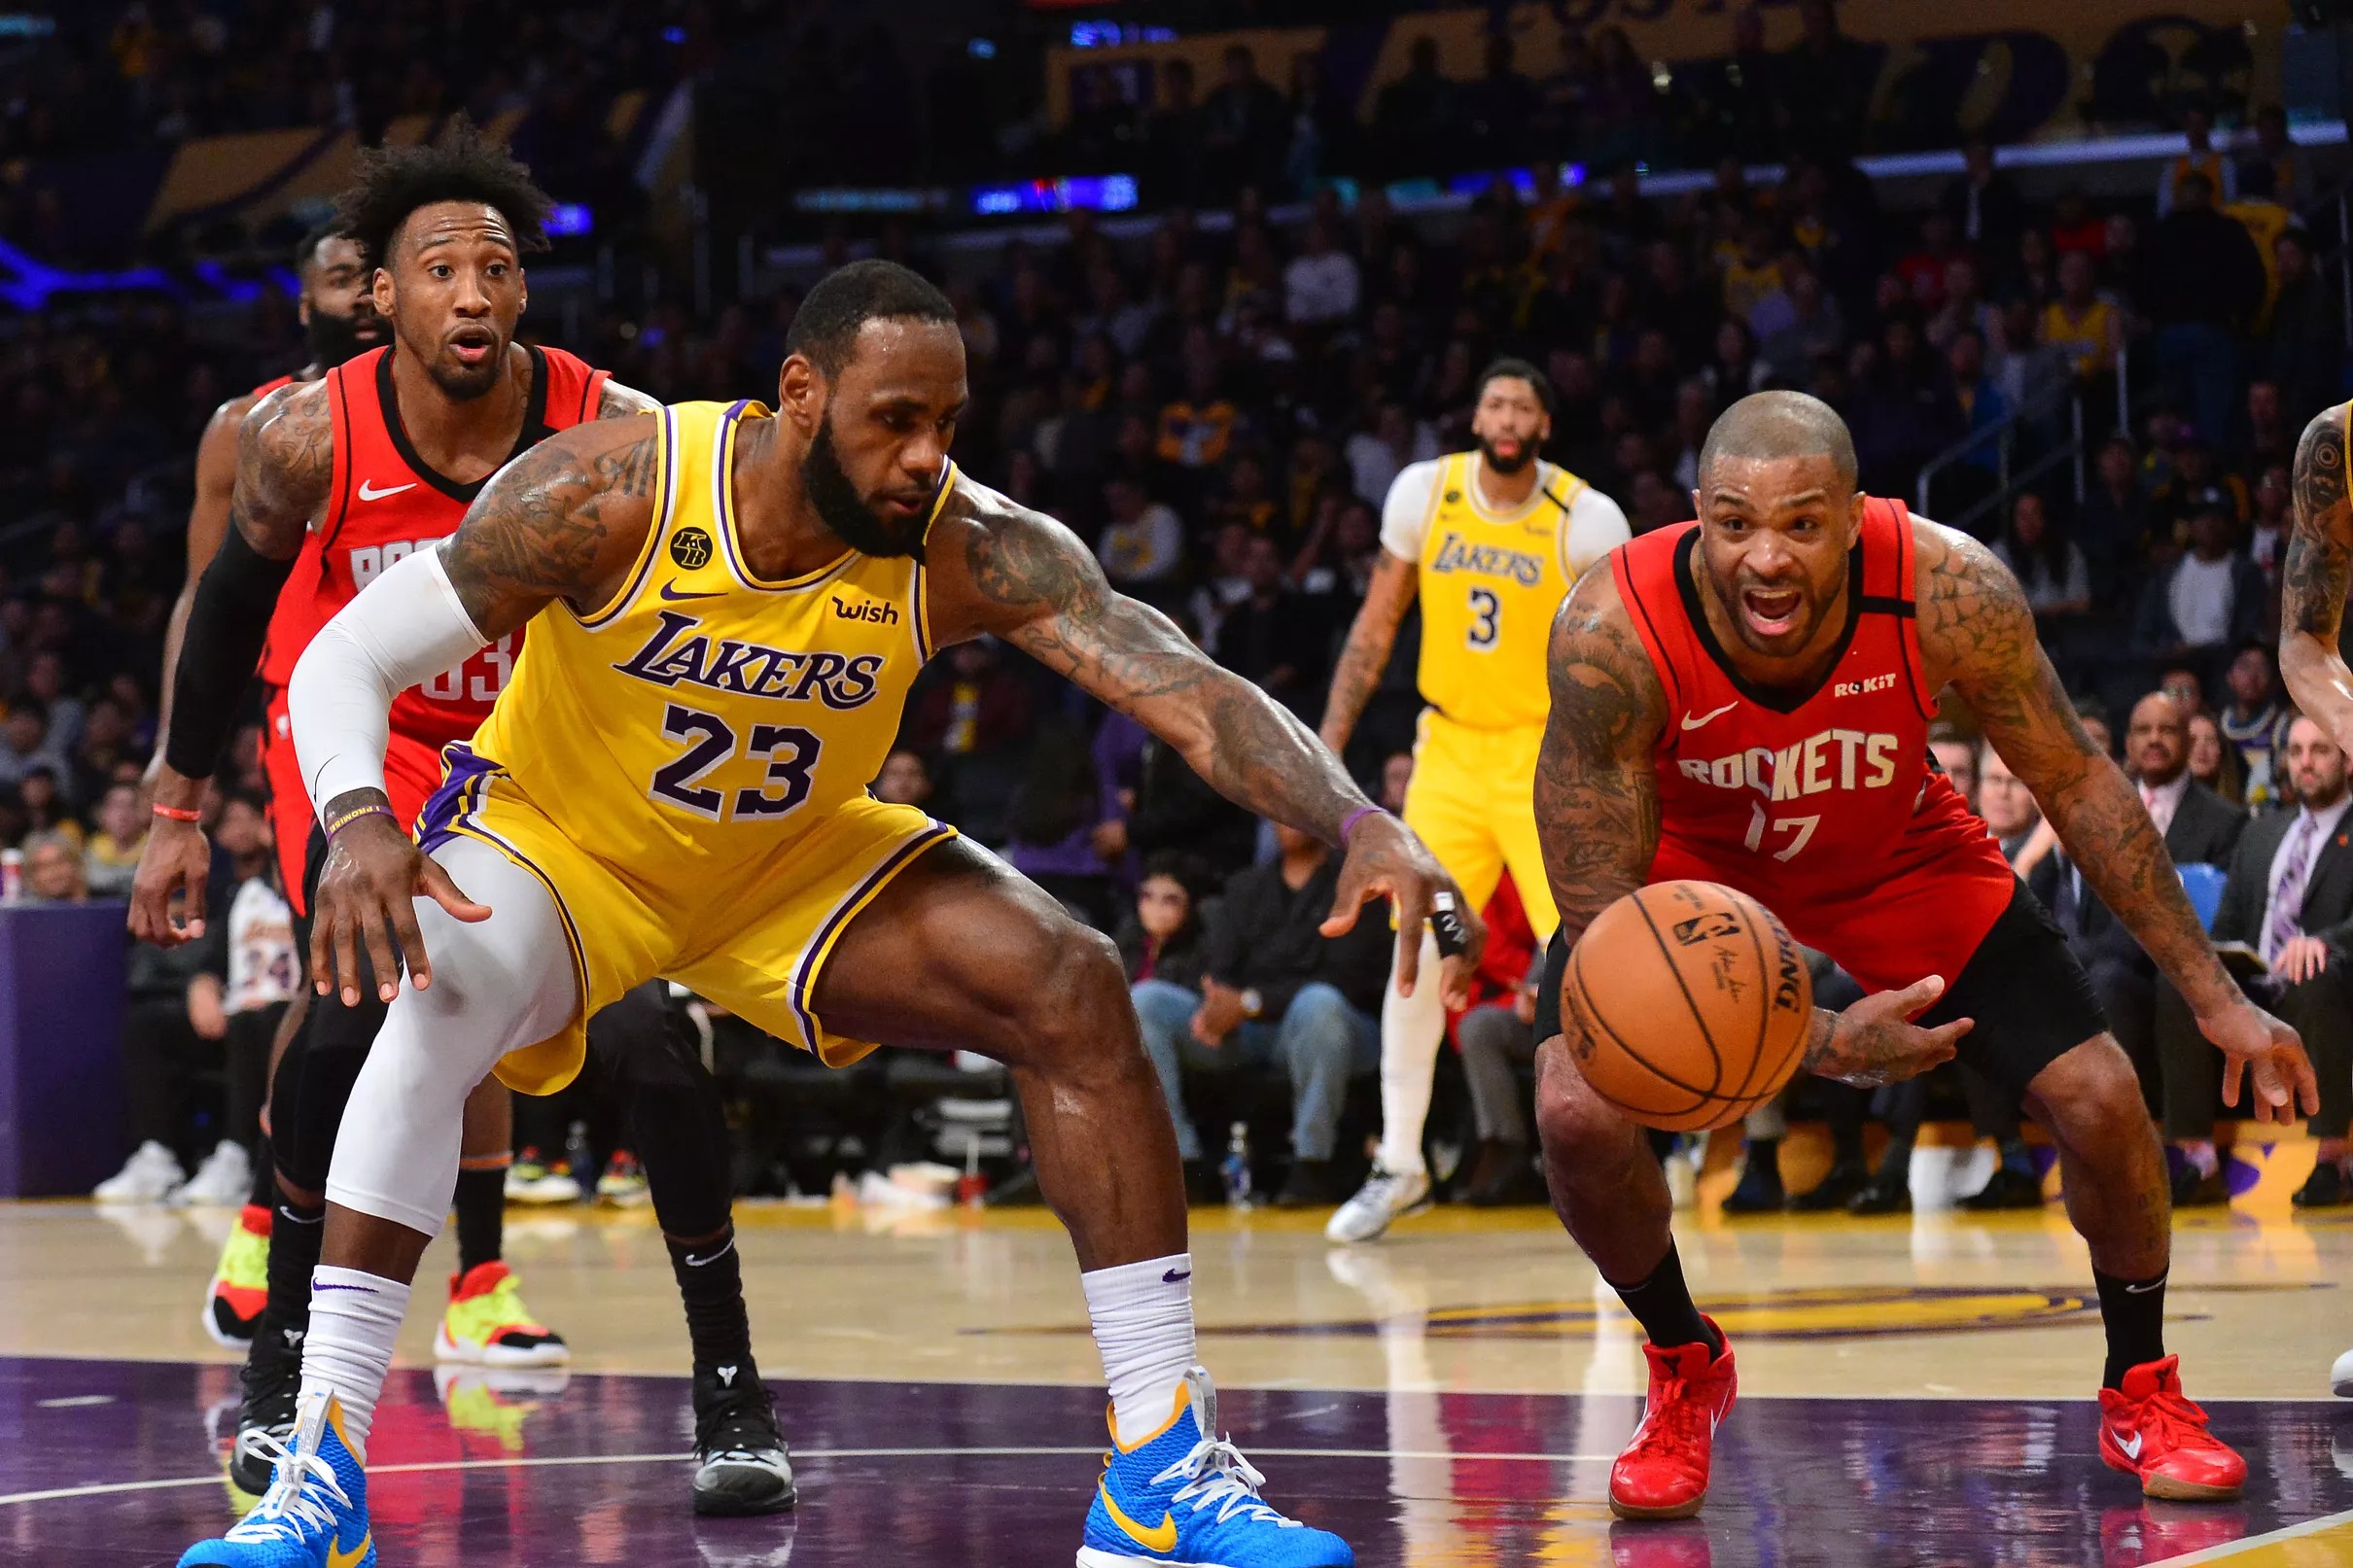 Houston Rockets vs. Los Angeles Lakers seeding game preview